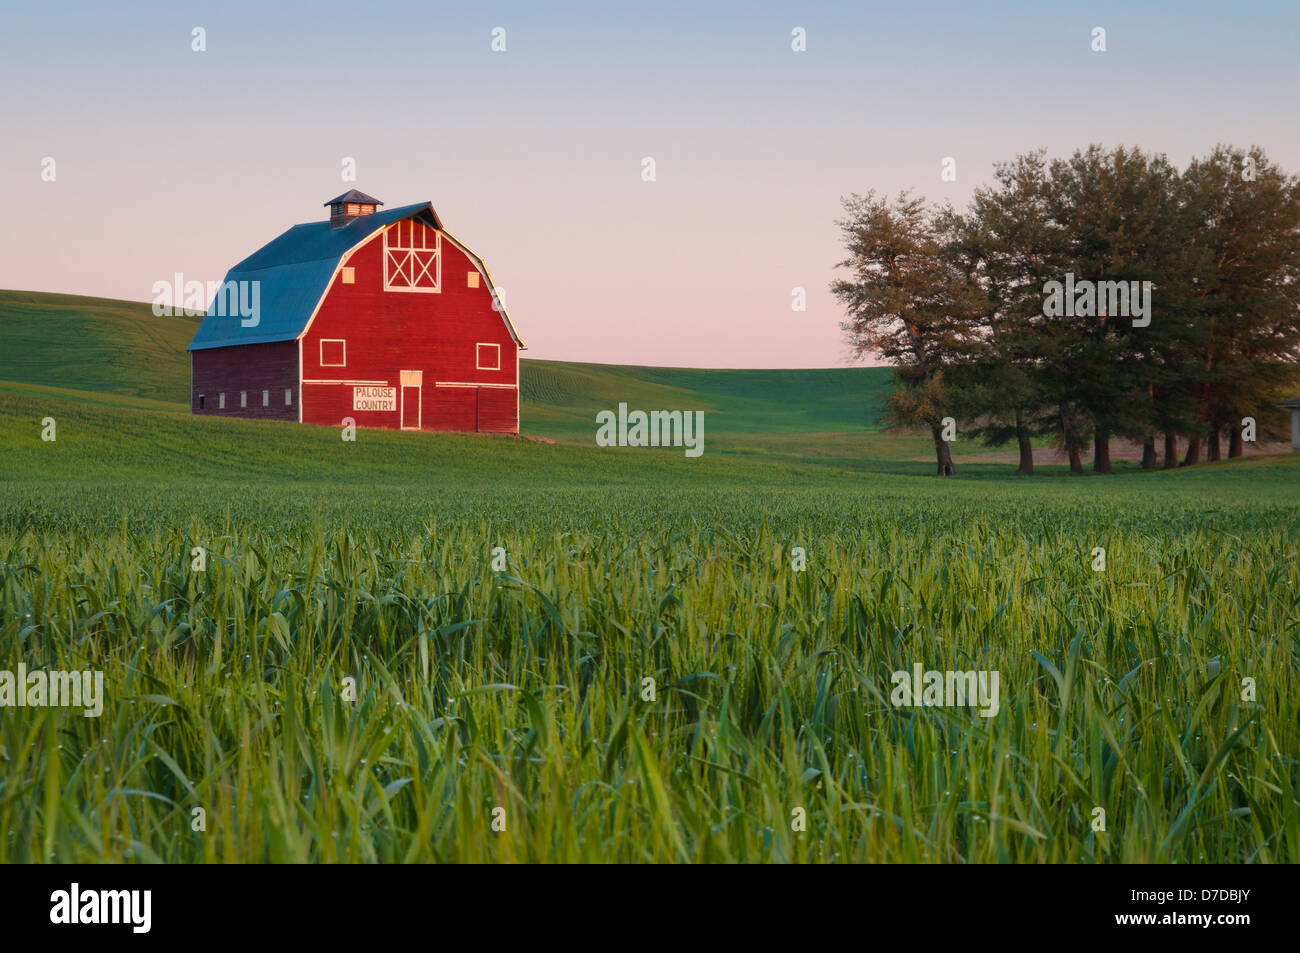 Red barn with 'Palouse Country' sign in wheat field, Uniontown, eastern Washington. Stock Photo